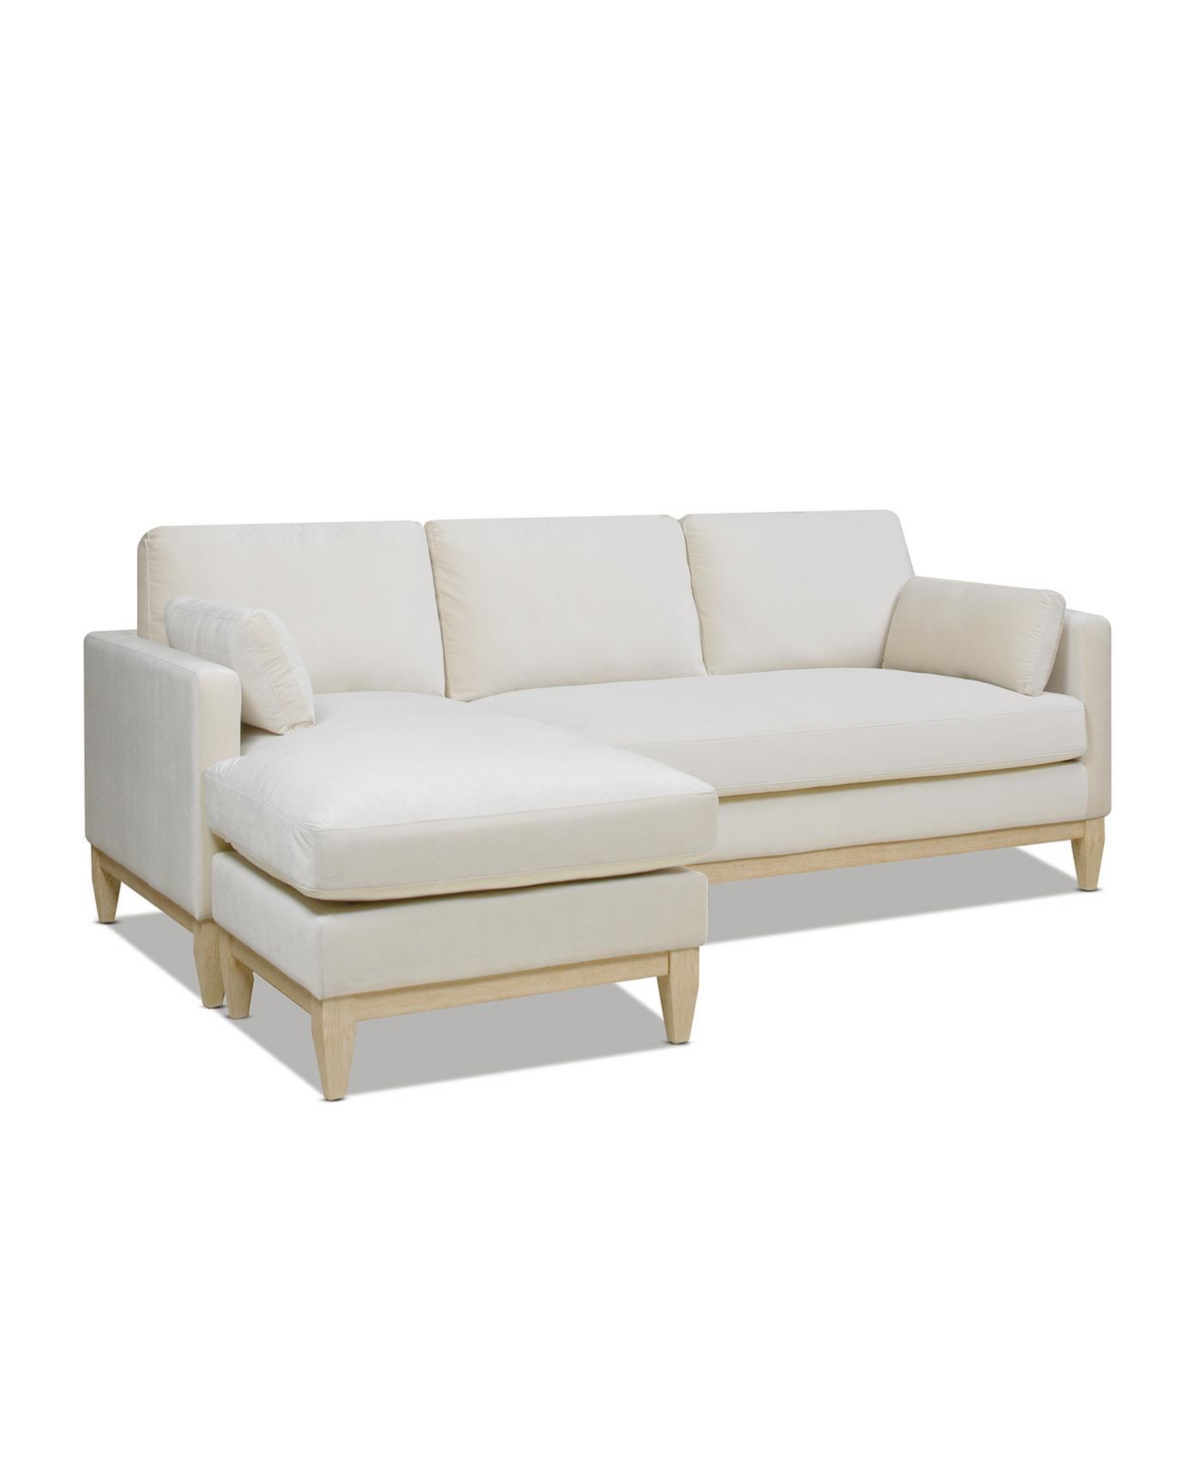 Jennifer Taylor Home Knox 89" Modern Farmhouse Reversible Chaise Sectional Sofa In French Beige